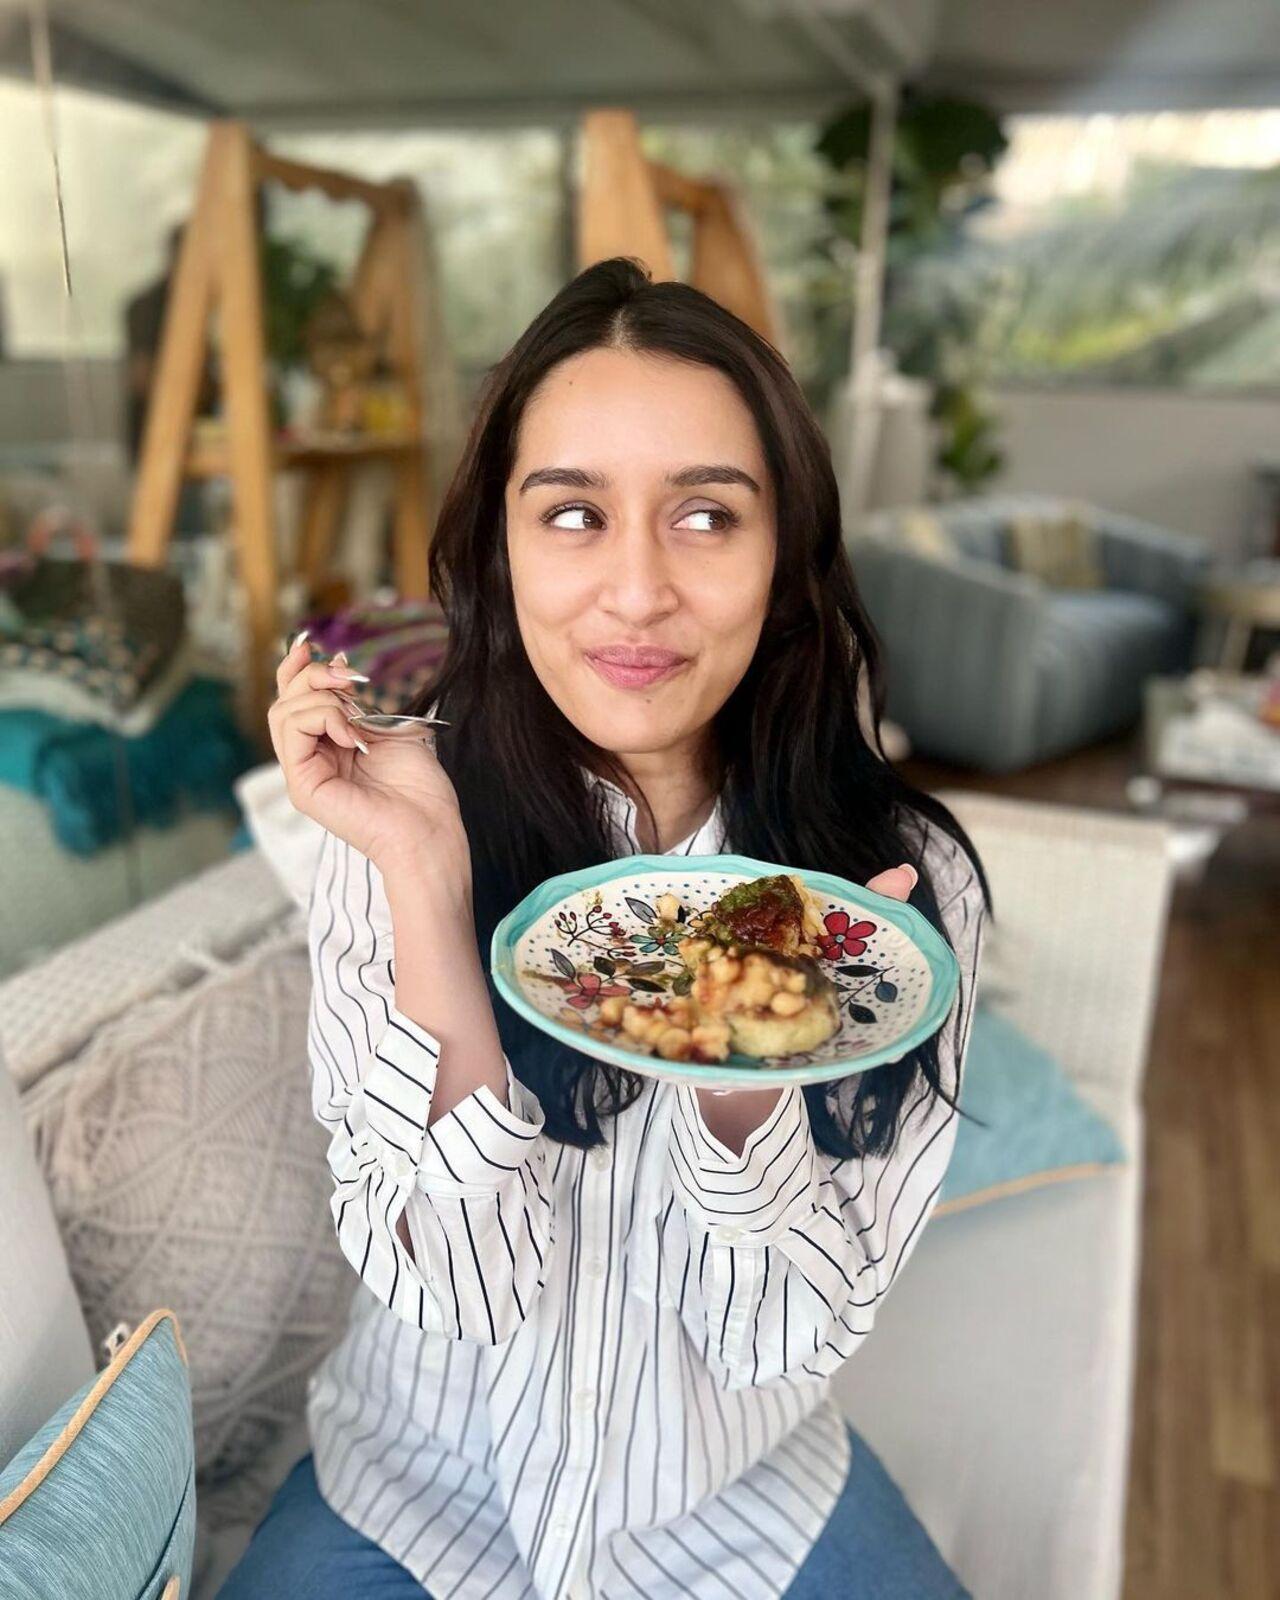 There is no coming between Shraddha and her food and the actress makes it clear through her love for food on the gram